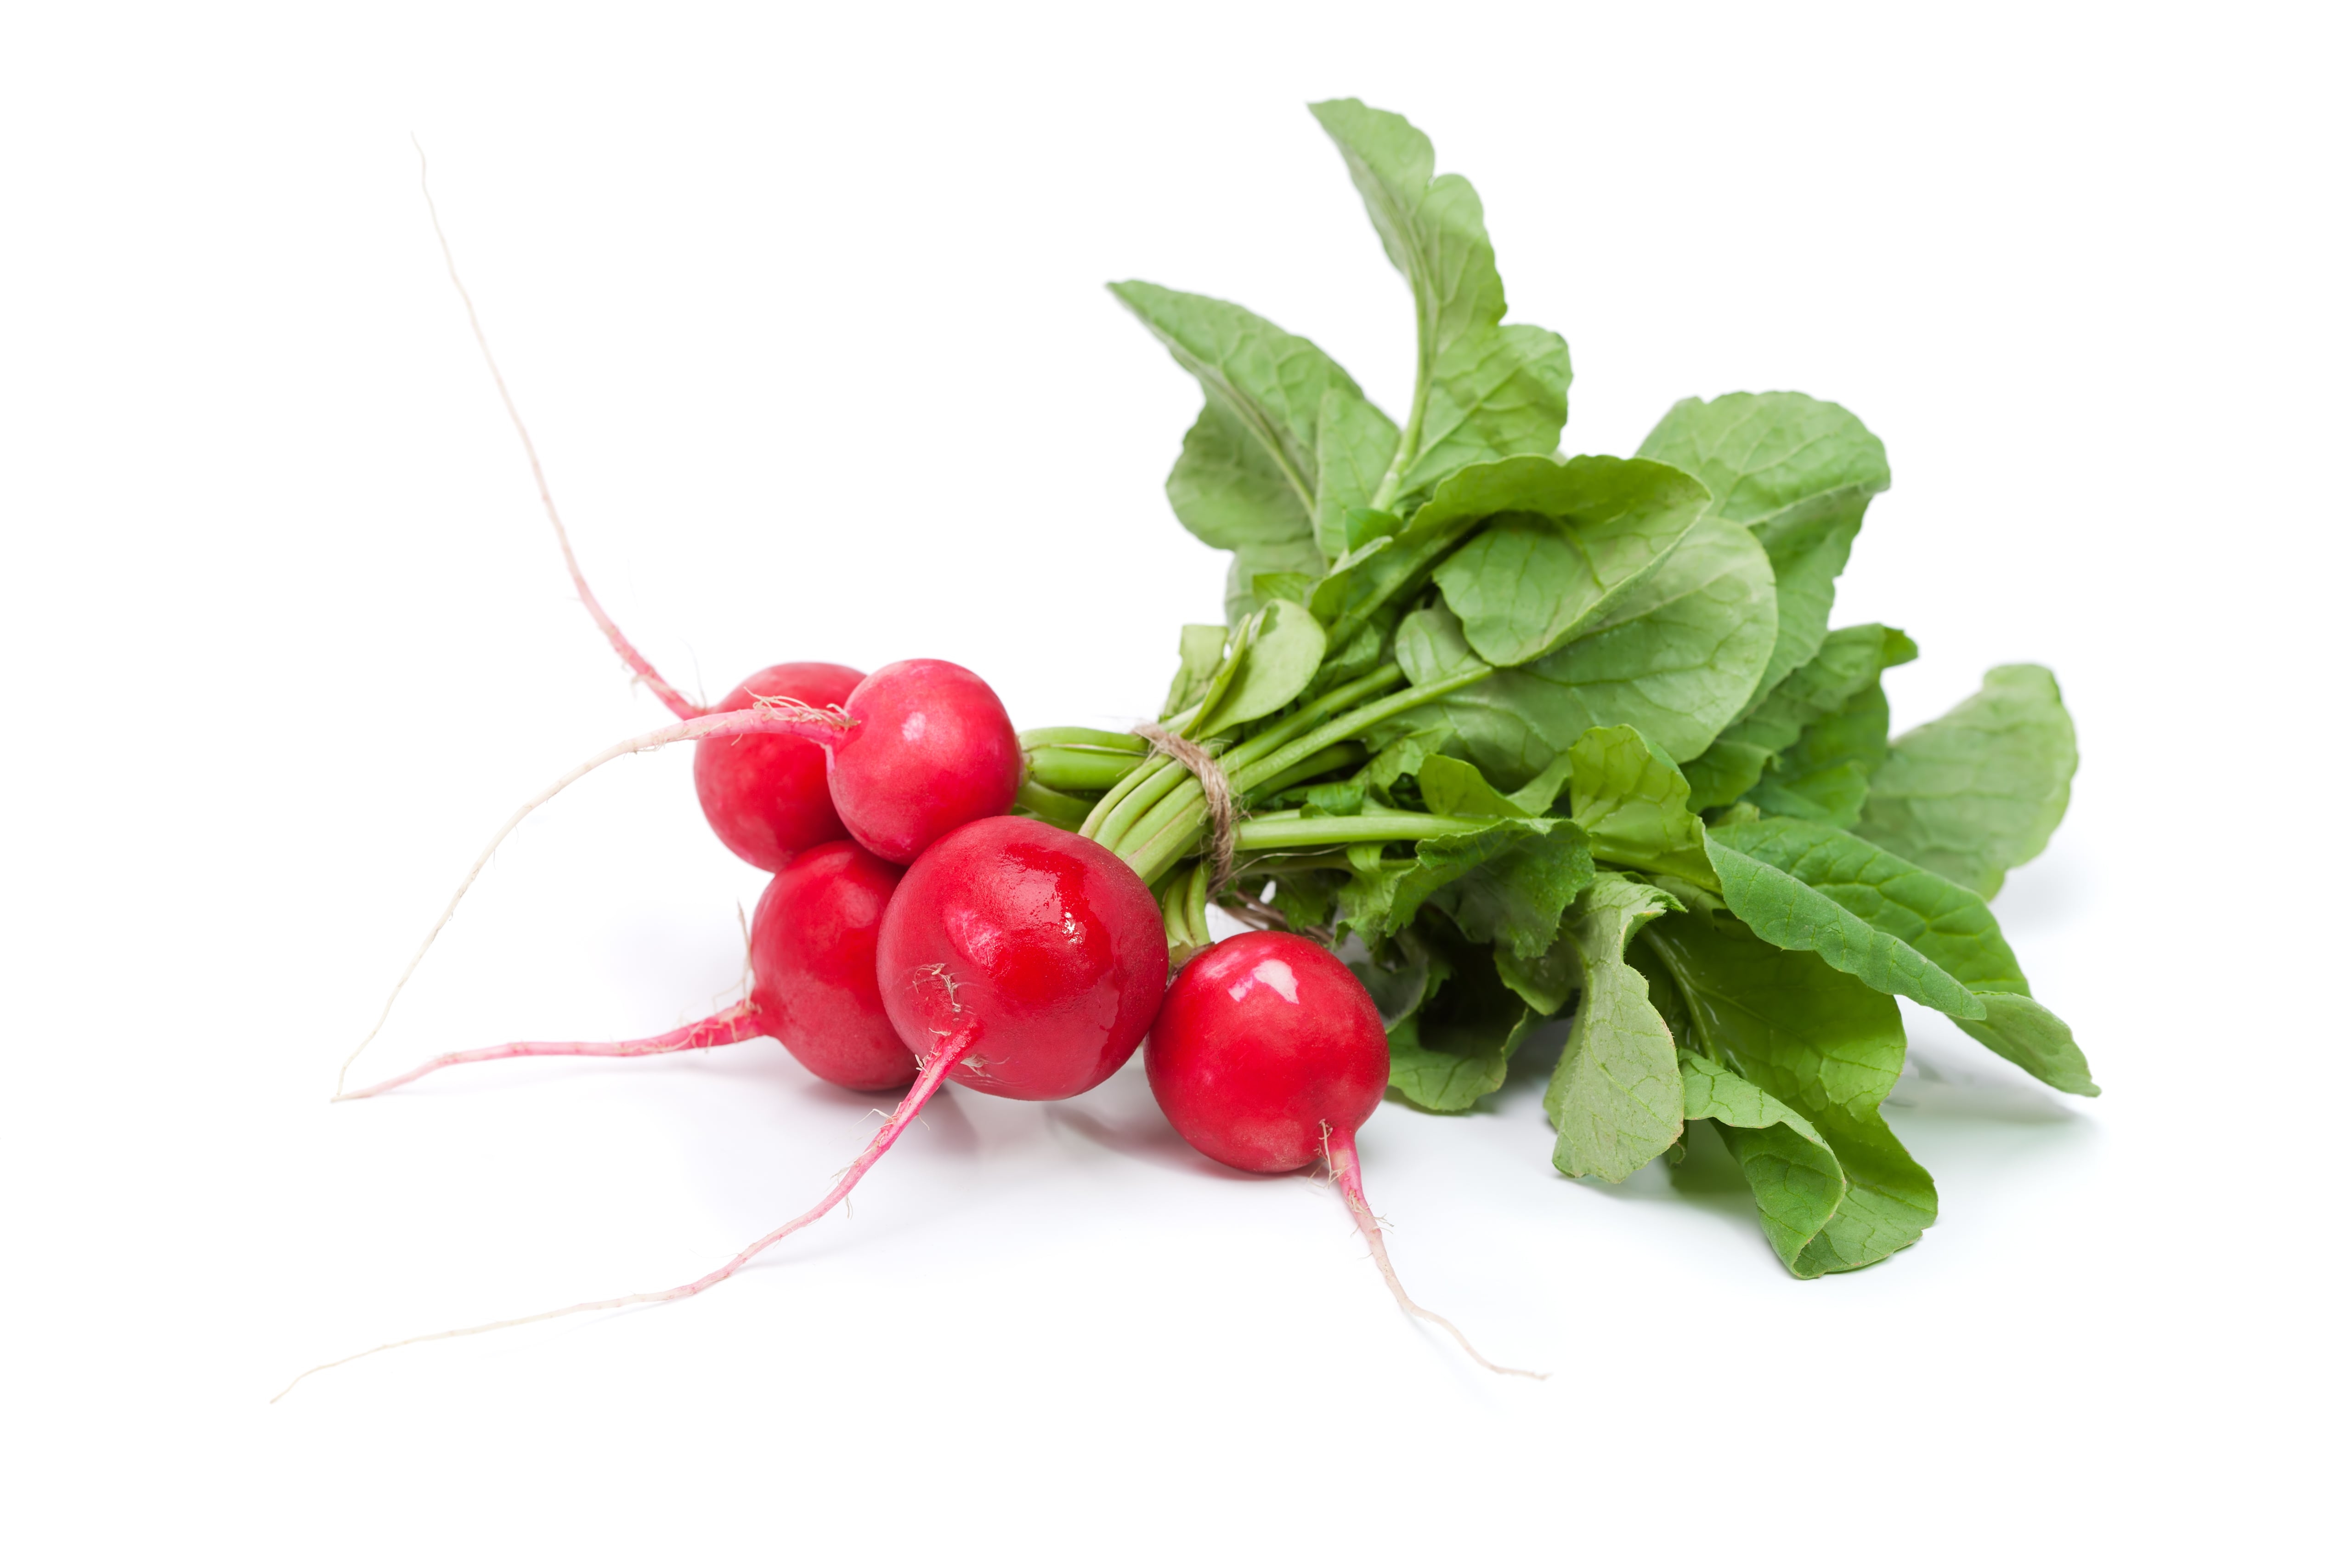 Market Fresh Finds: Radishes perfect for much more than garnish